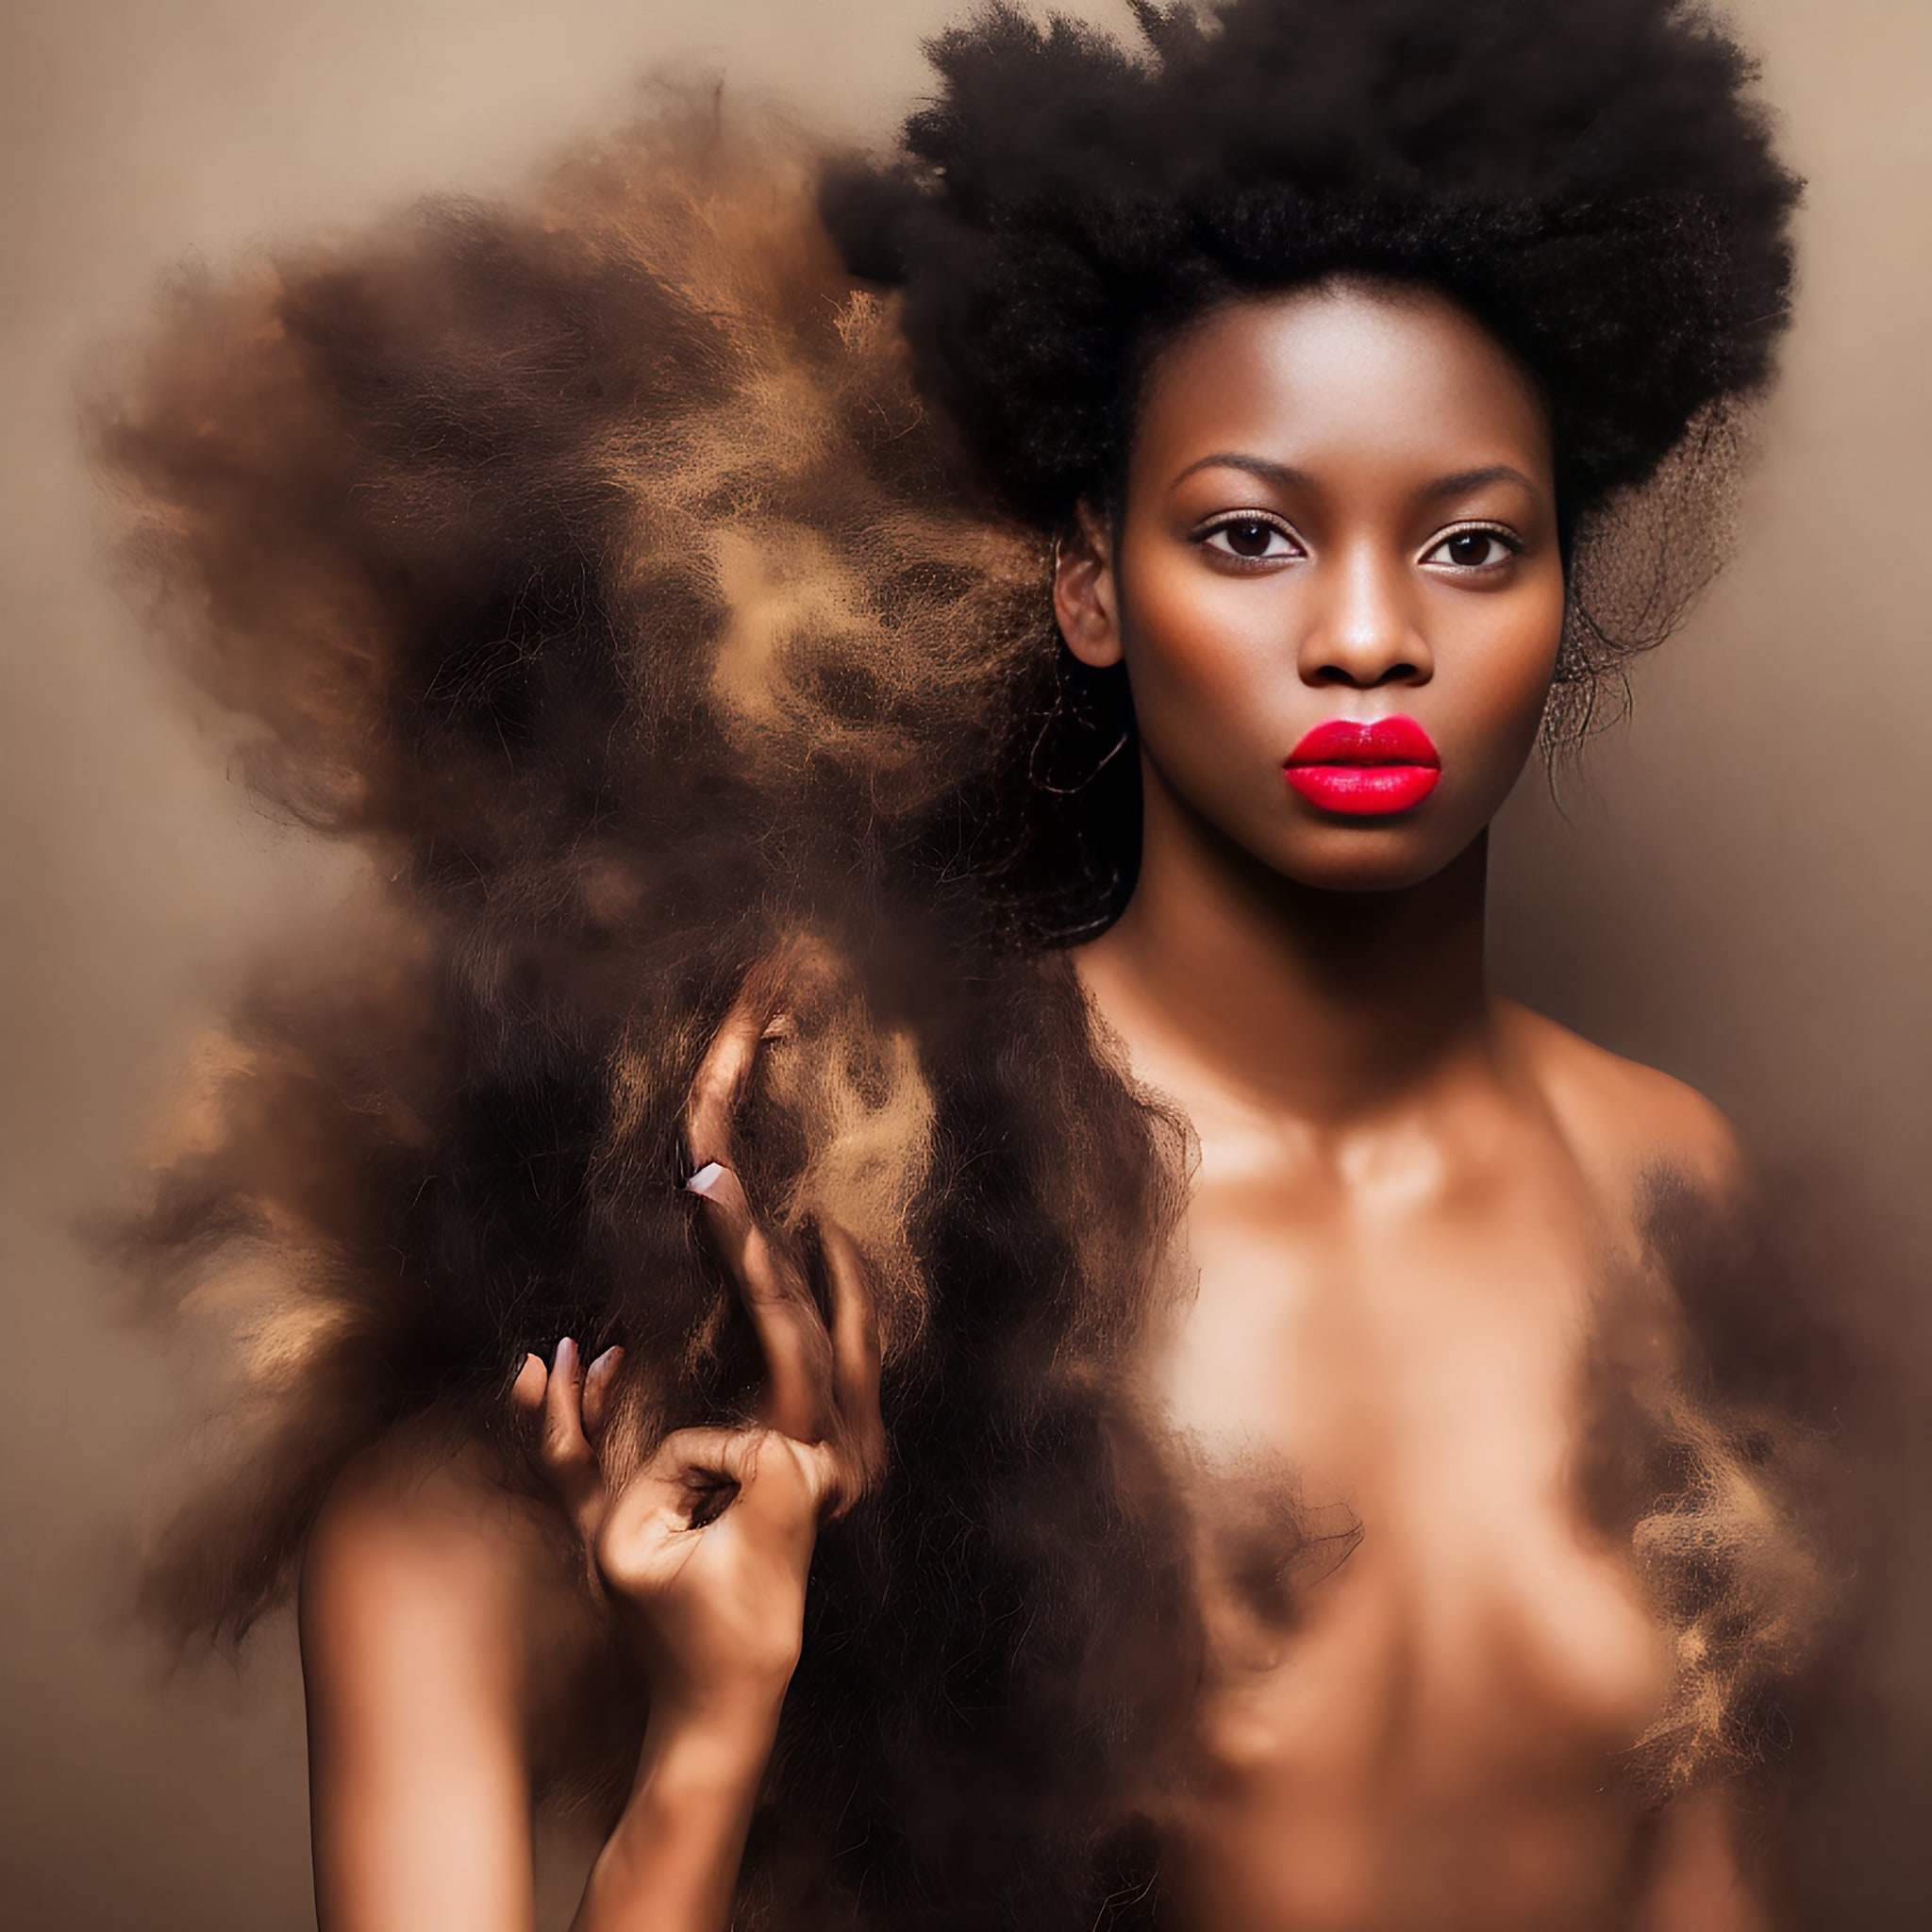 baroque-painting-of-an-african-model-with-wild-hair-red-ips